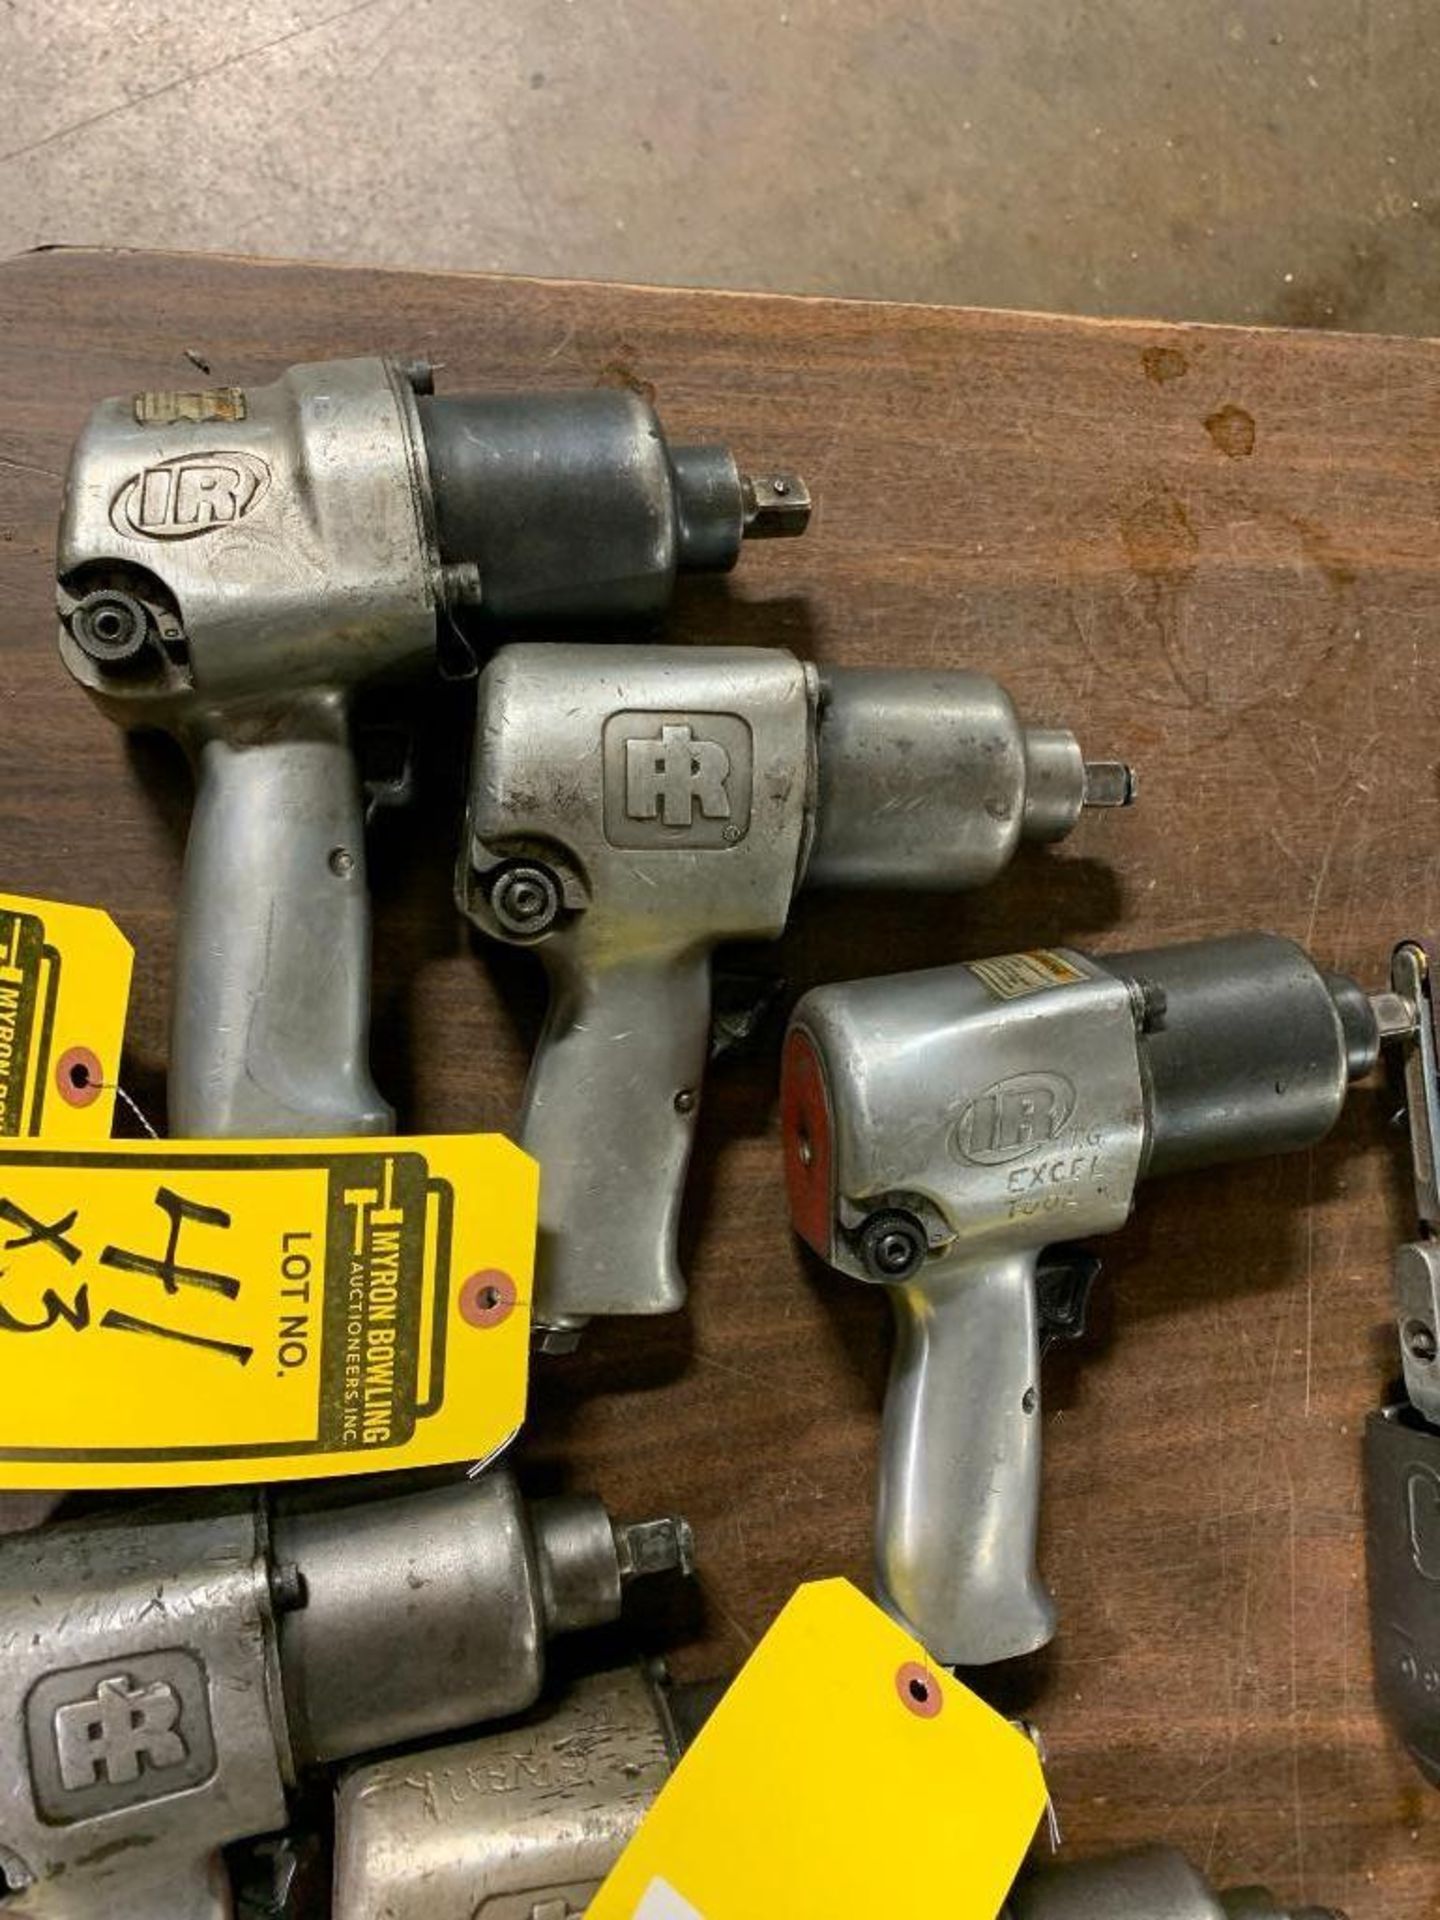 (3) INGERSOLL RAND 1/2'' PNEUMATIC IMPACT WRENCHES